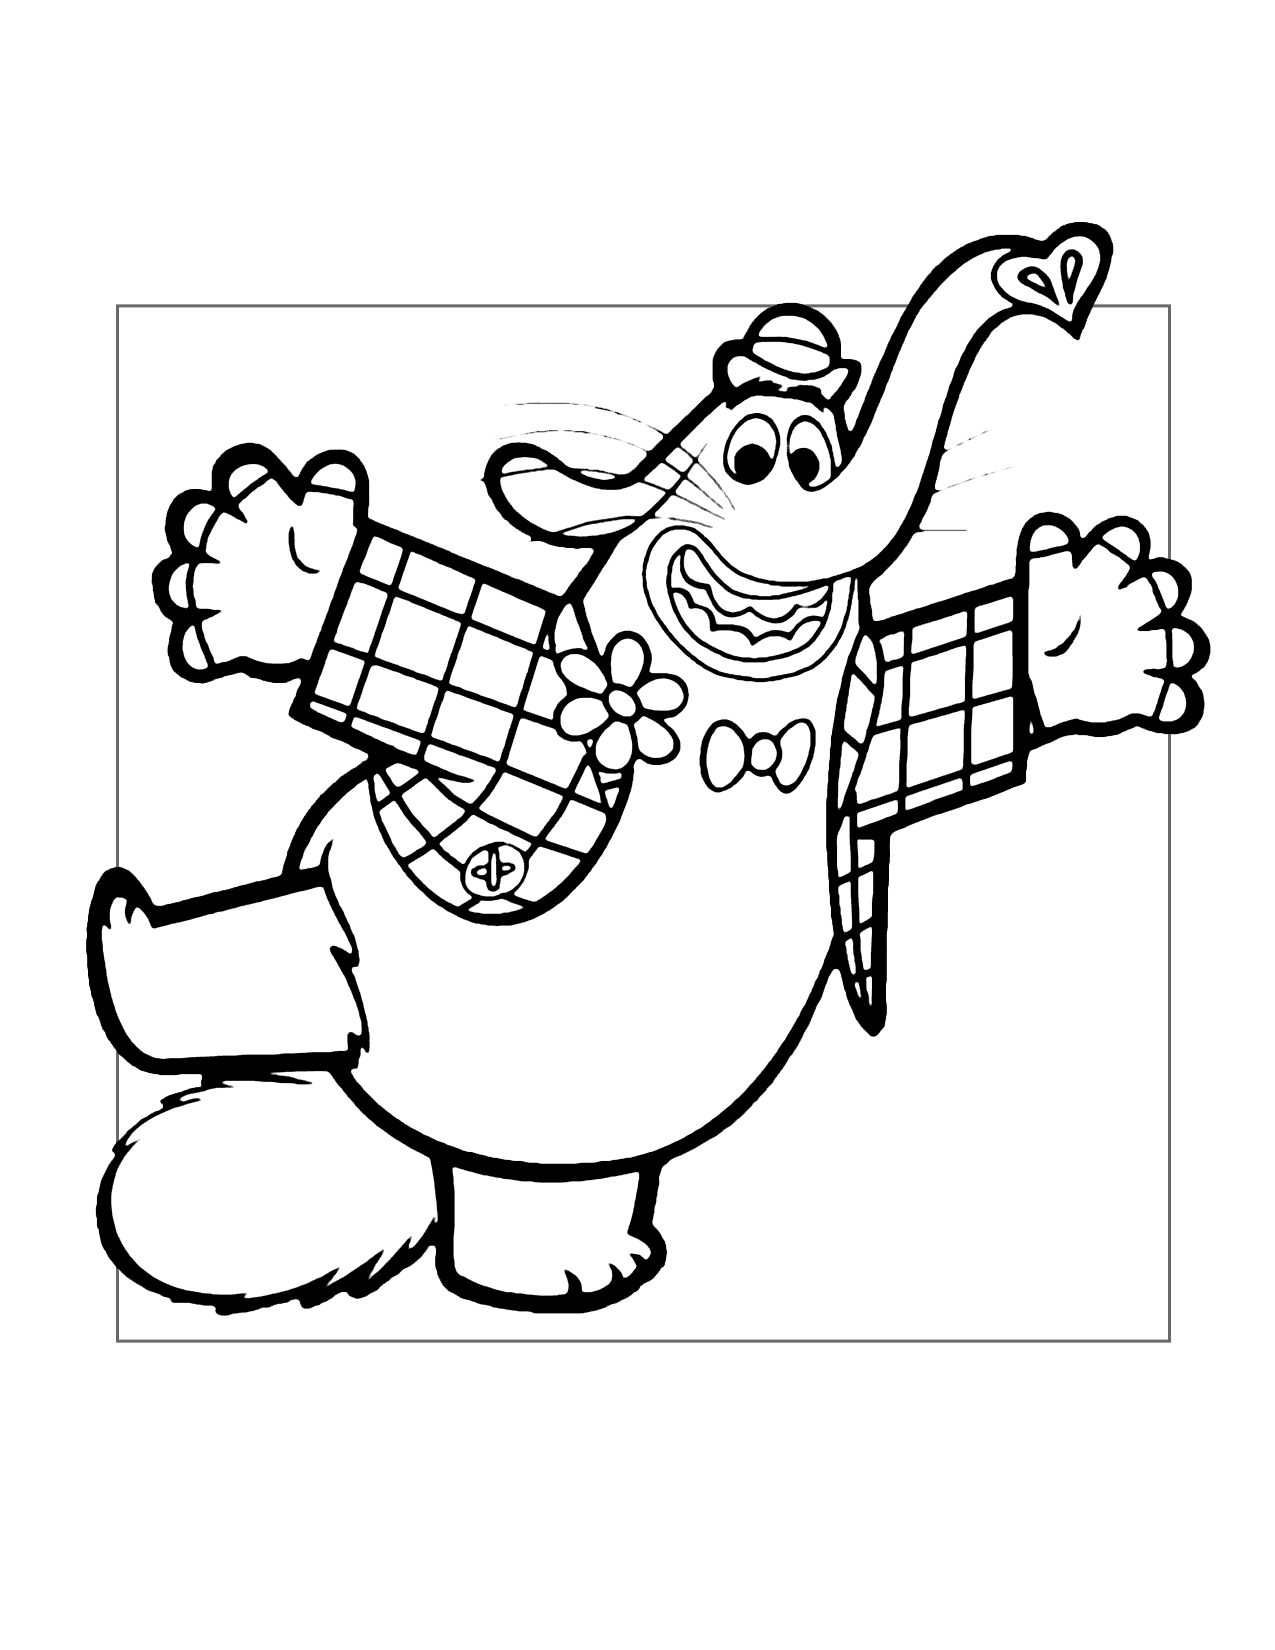 Bing Bong Inside Out Coloring Page